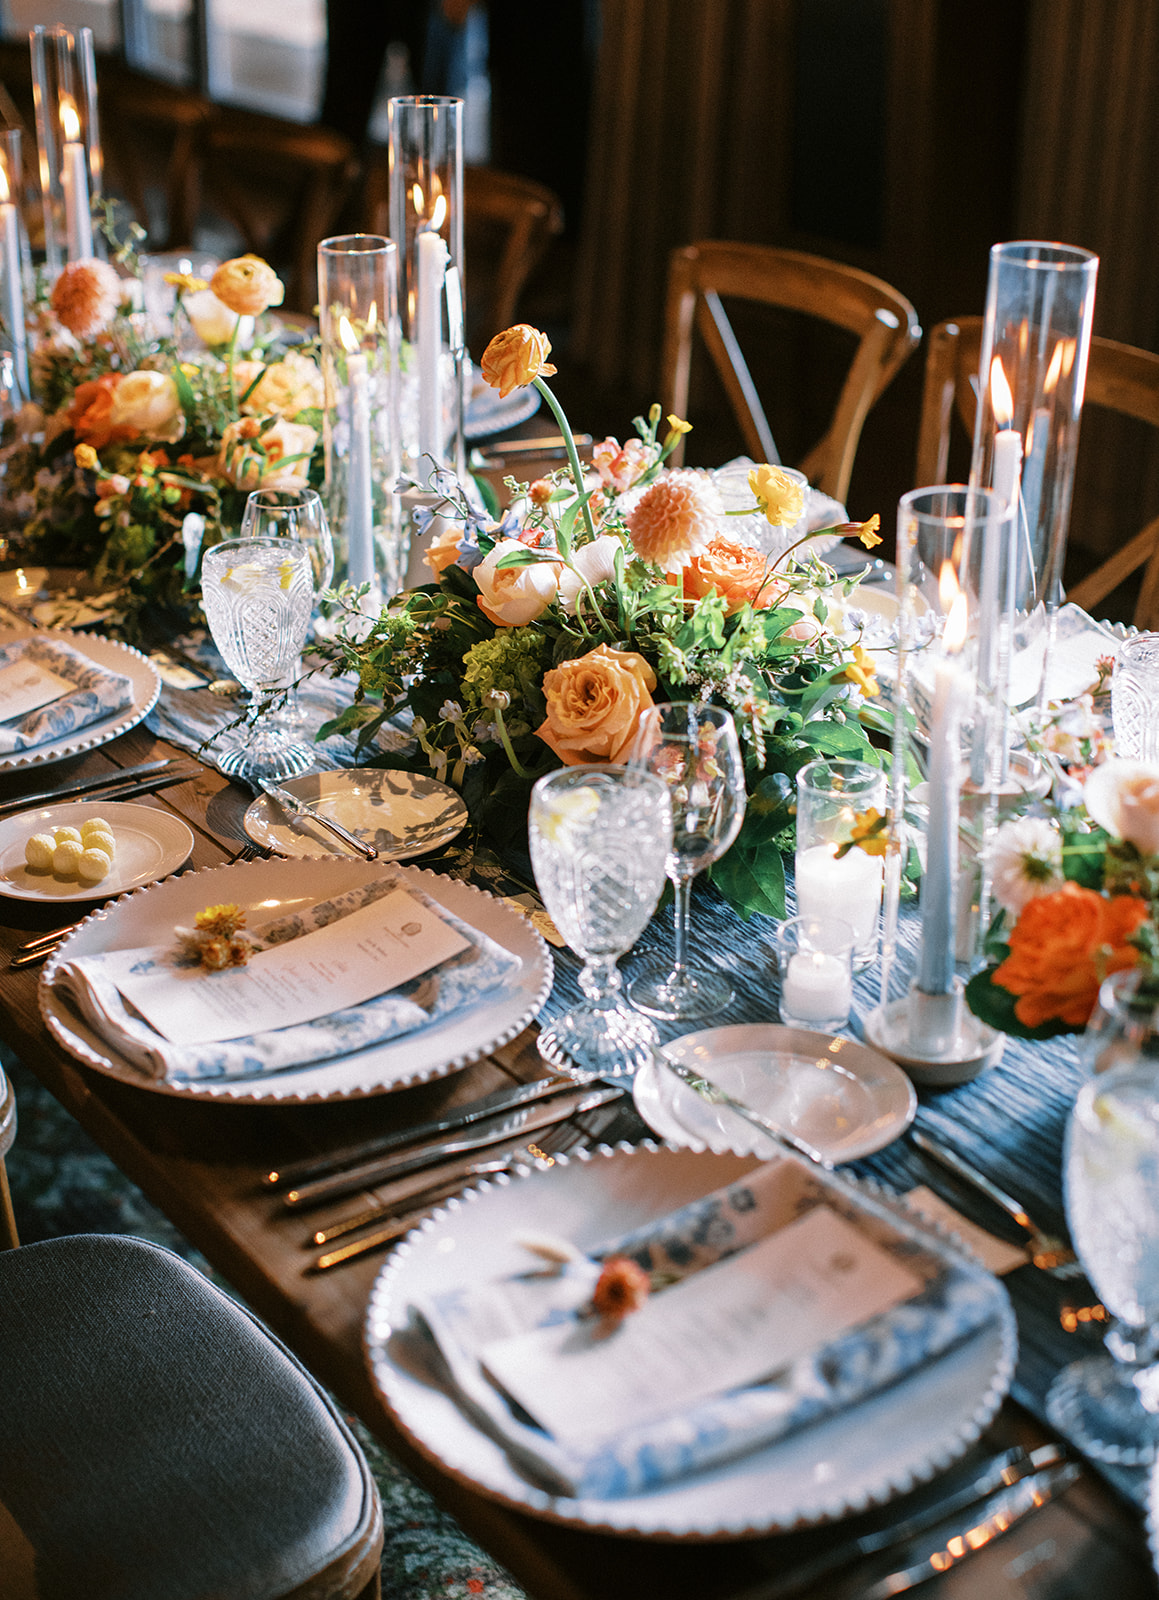 wedding table decorations with a colorful wedding palette including bright blue and orange flowers, blue linens and candles 